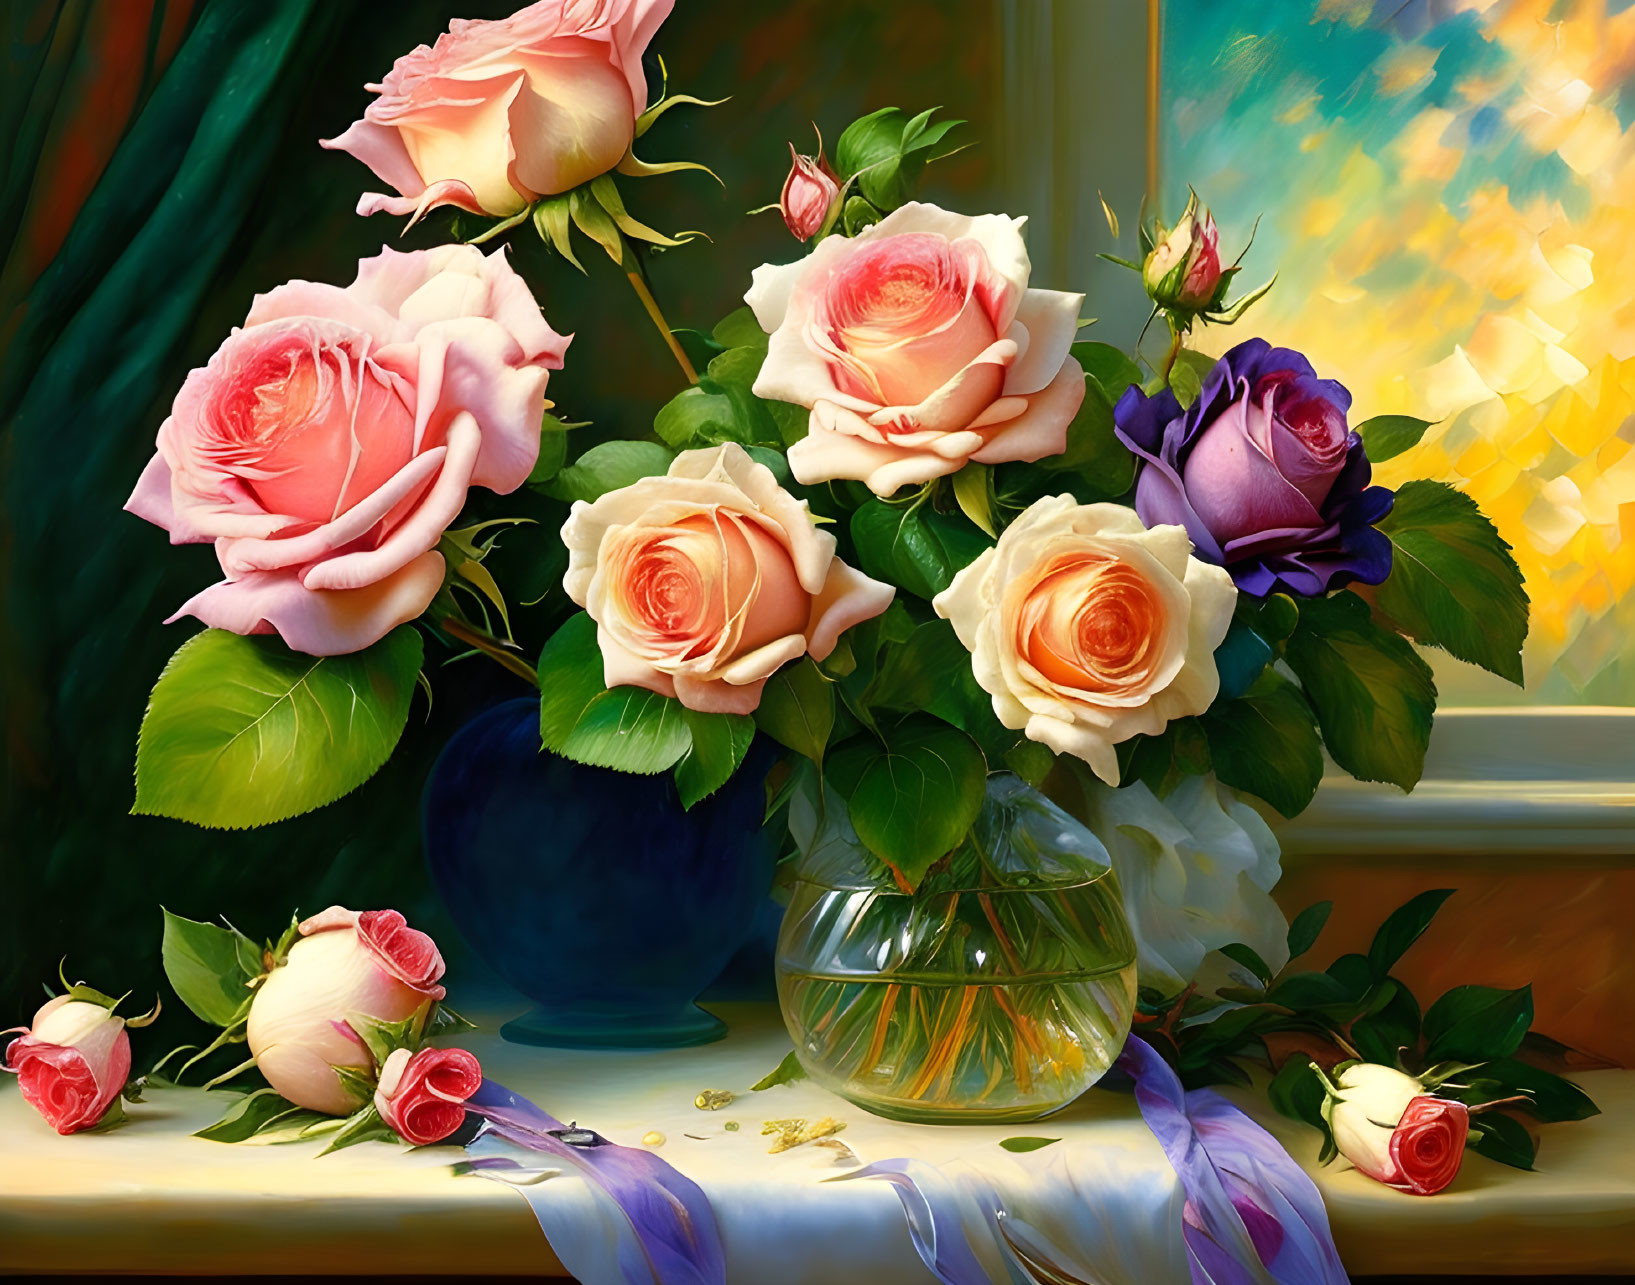 Colorful Rose Bouquet in Clear Vase on Sunlit Window Ledge